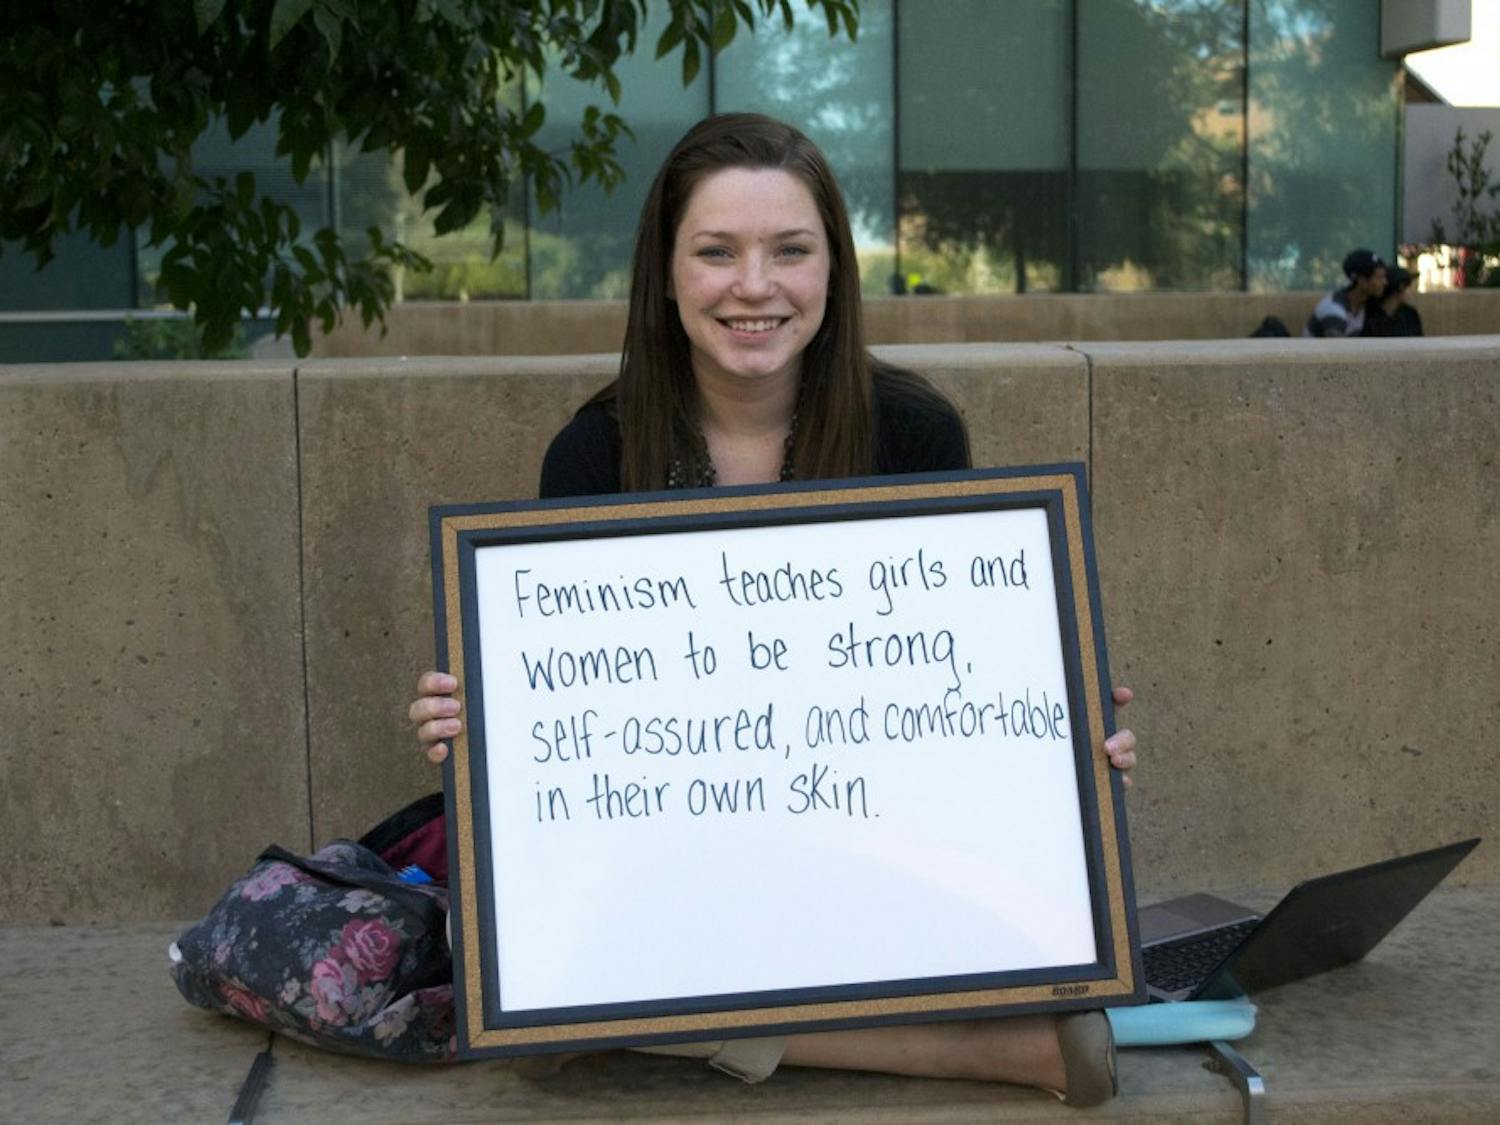 Maggie Dellow, who studies urban planning, says,"Feminism teaches girls and women to be strong, self-assured and comfortable in their own skin."
Photo by Mackenzie McCreary